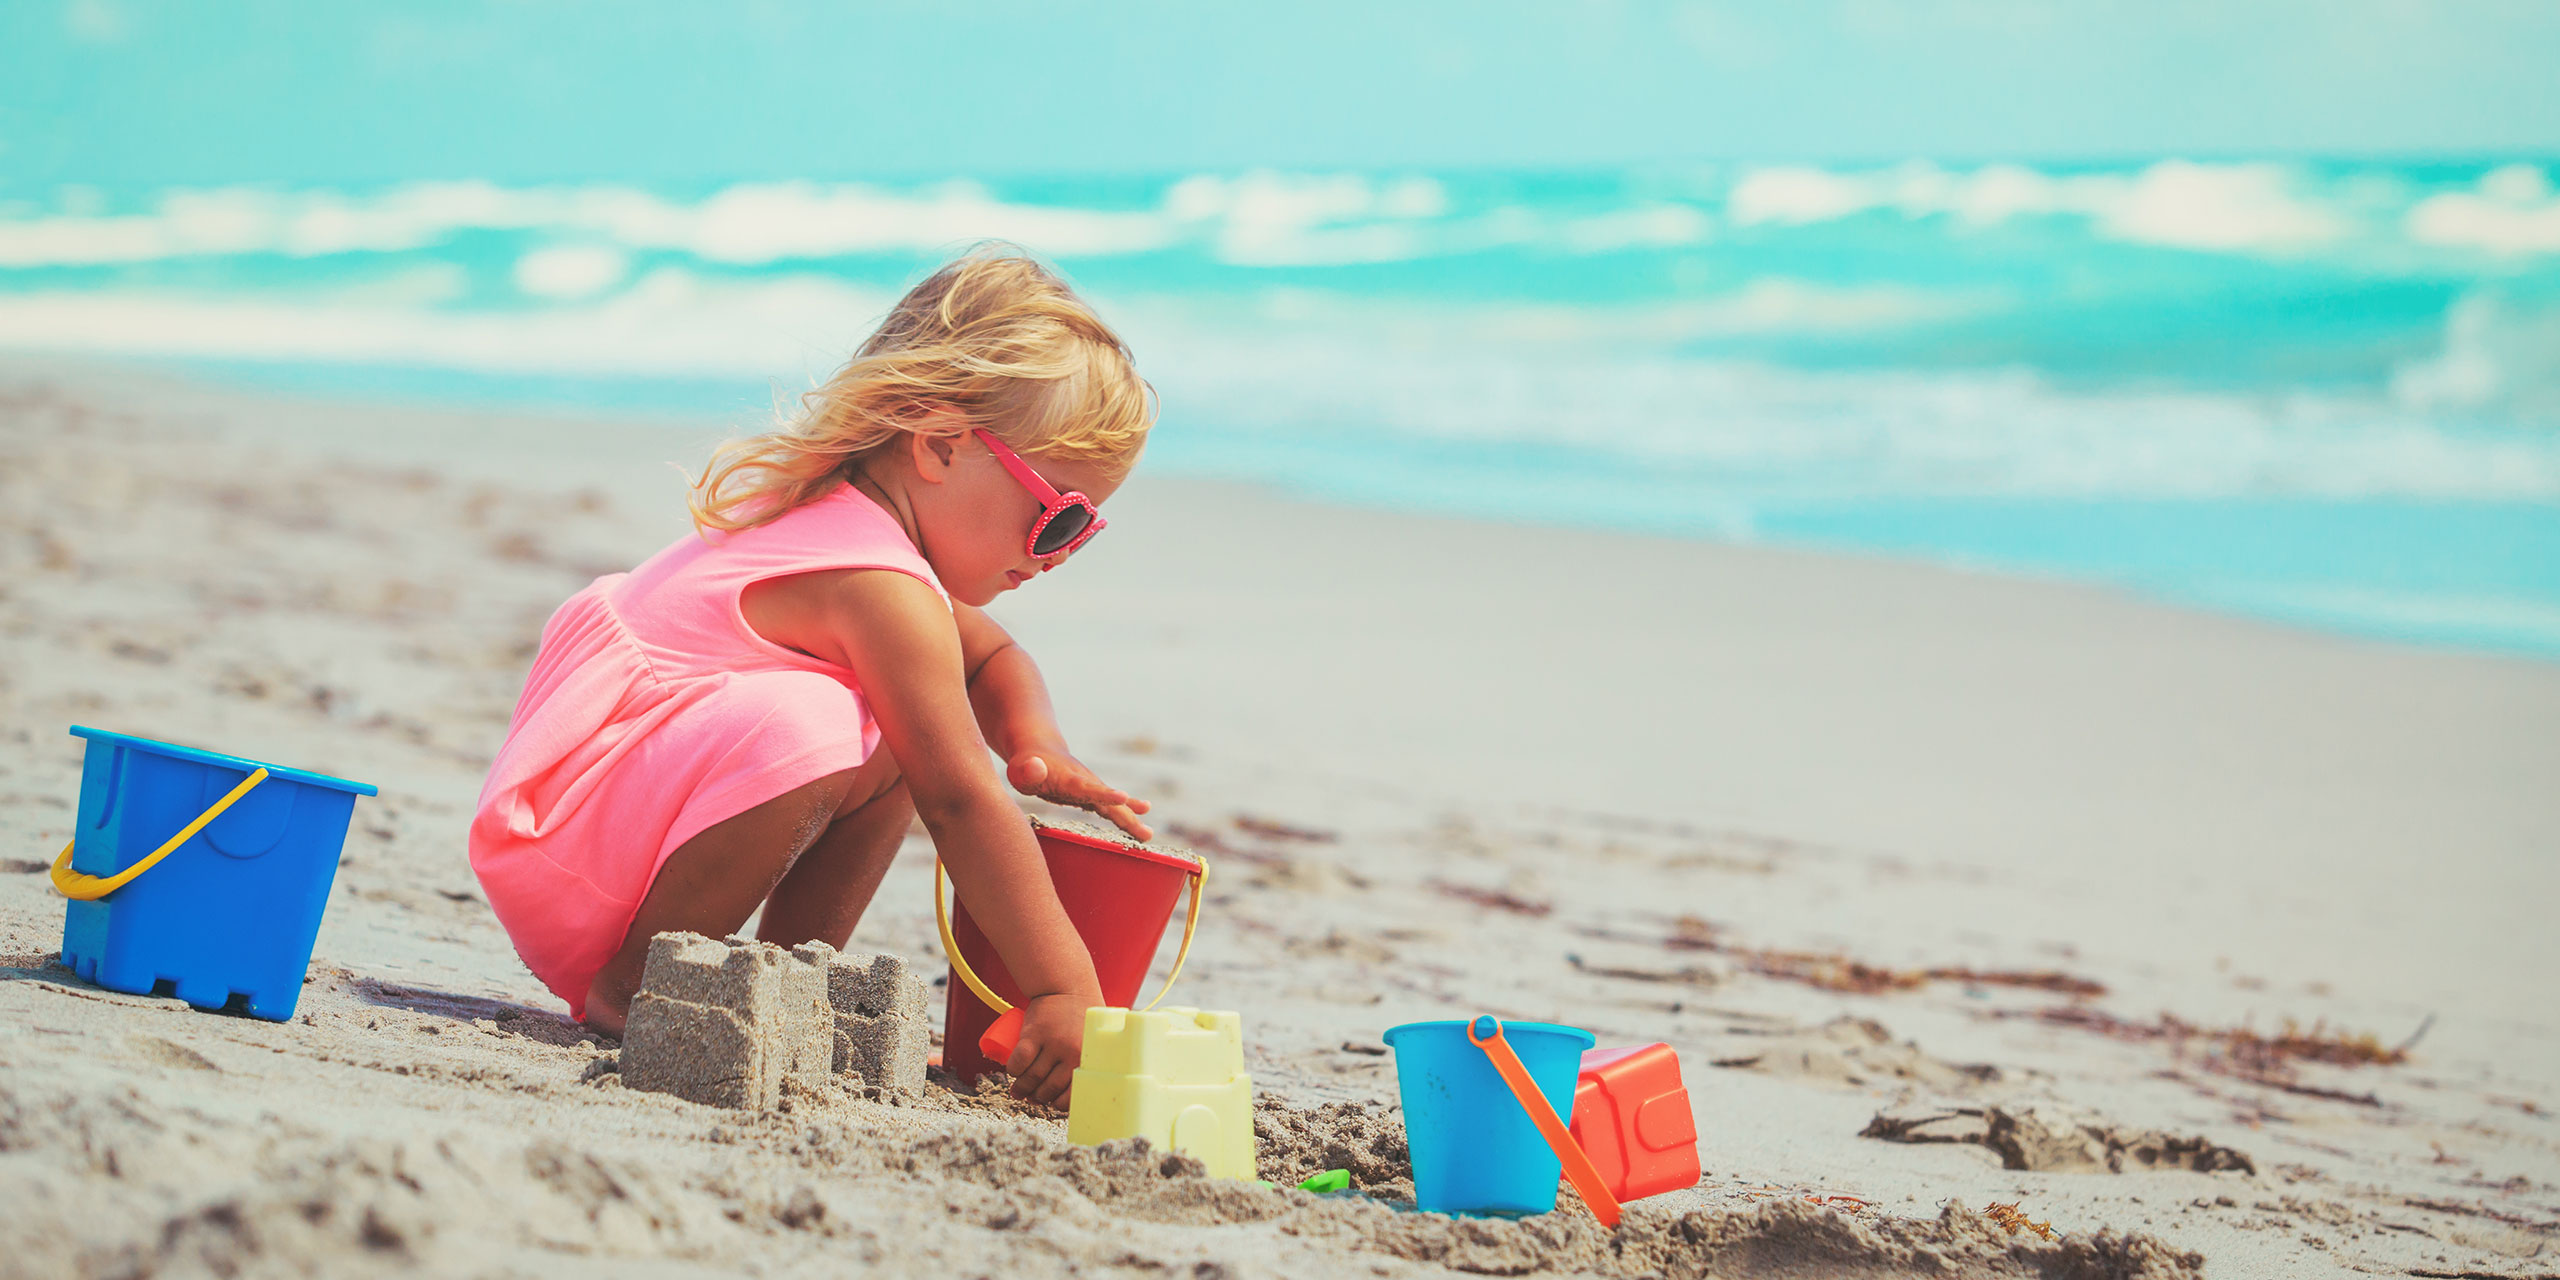 Little Girl Playing with Sand Toys on the Beach;NadyaEugene/Shutterstock.com